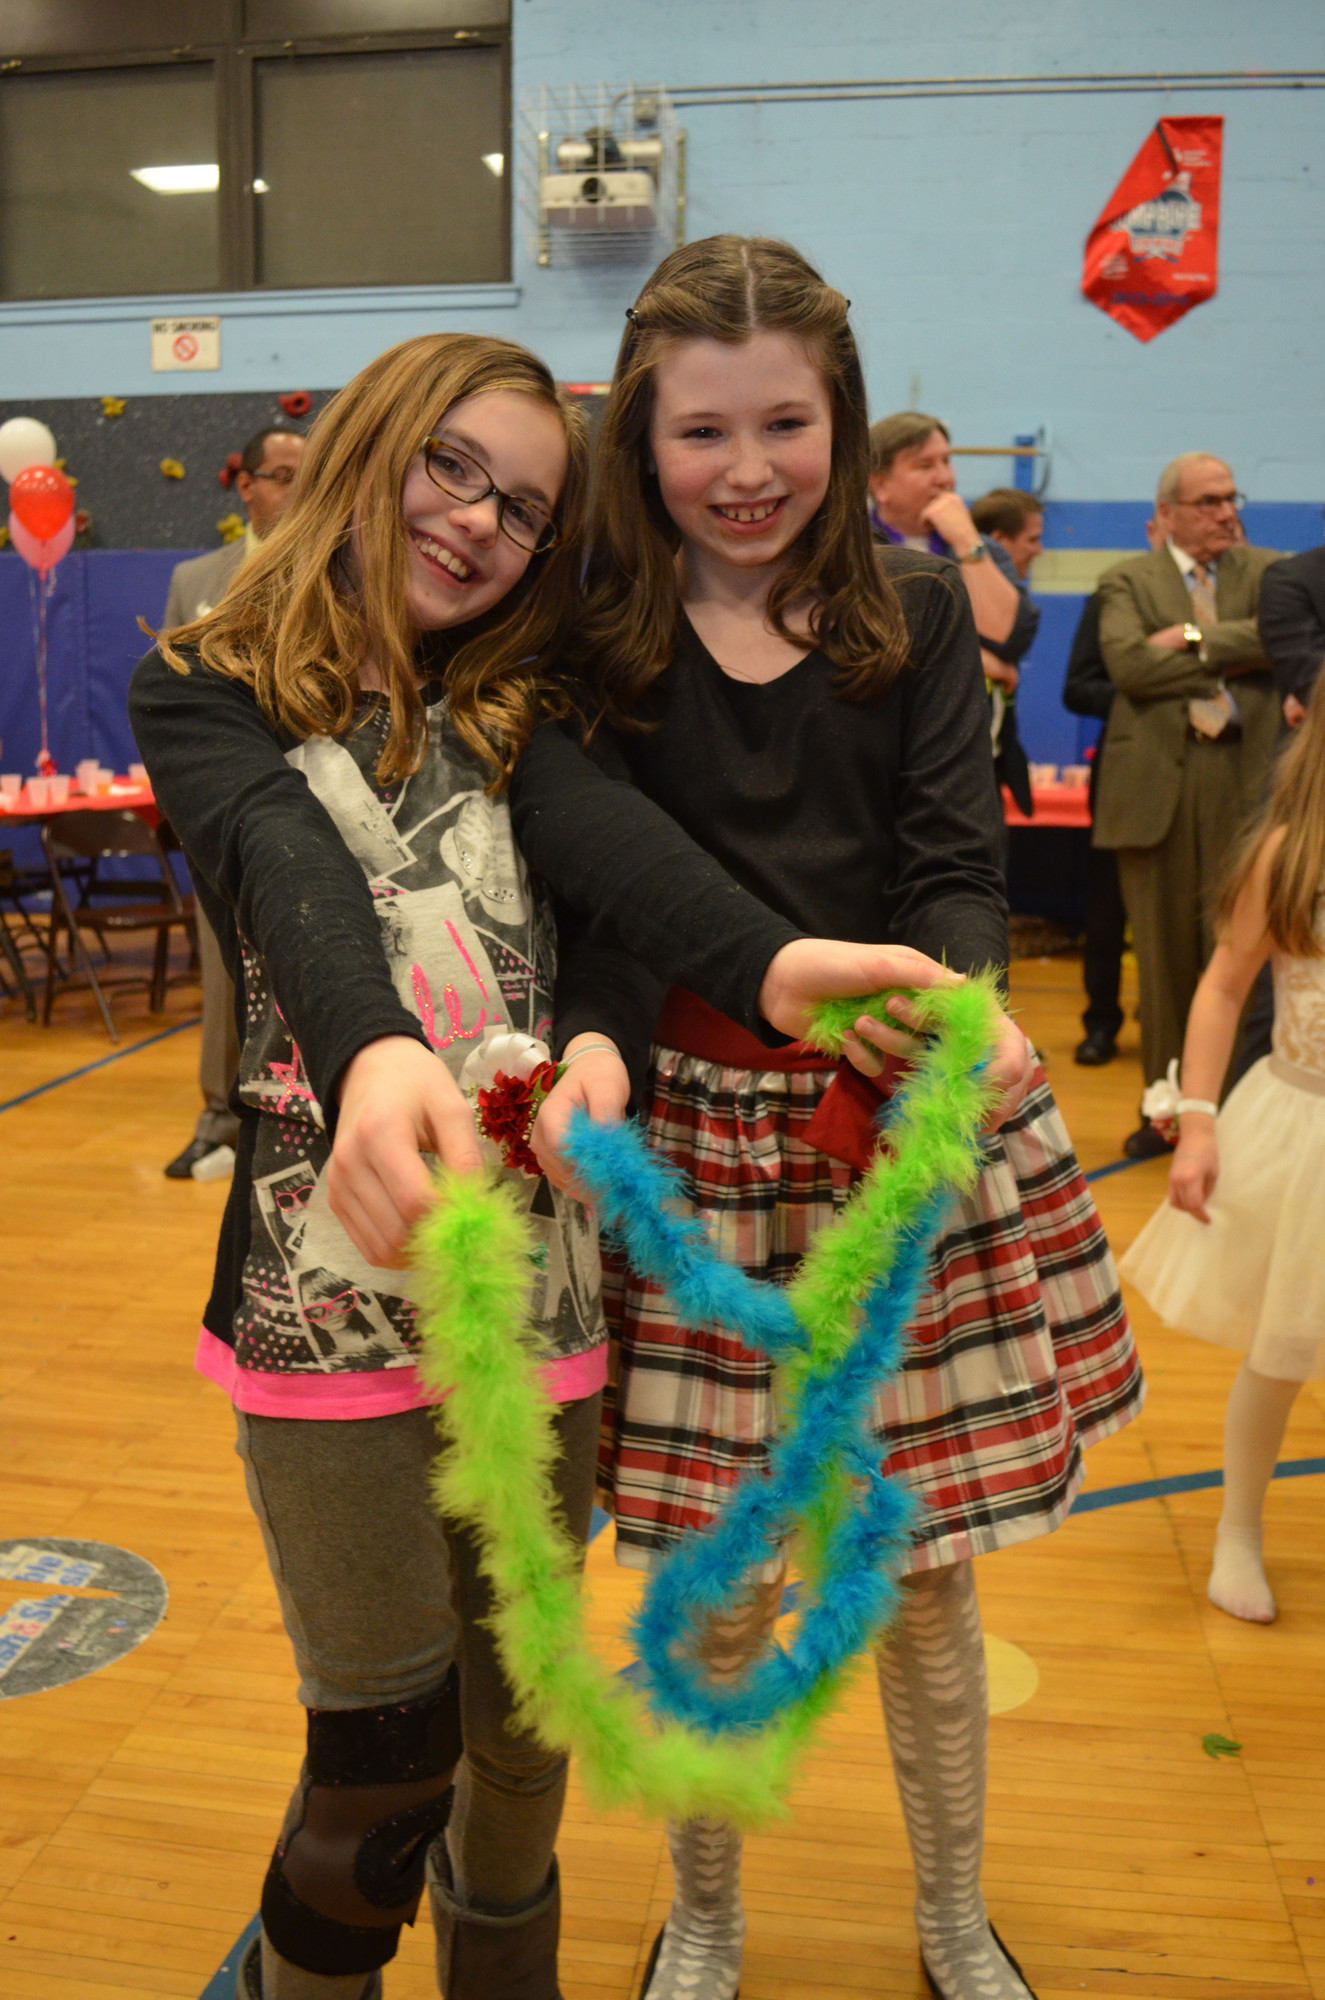 Fourth graders Reese Gallagher, left, and Sile Kelly hung out together at the dance.